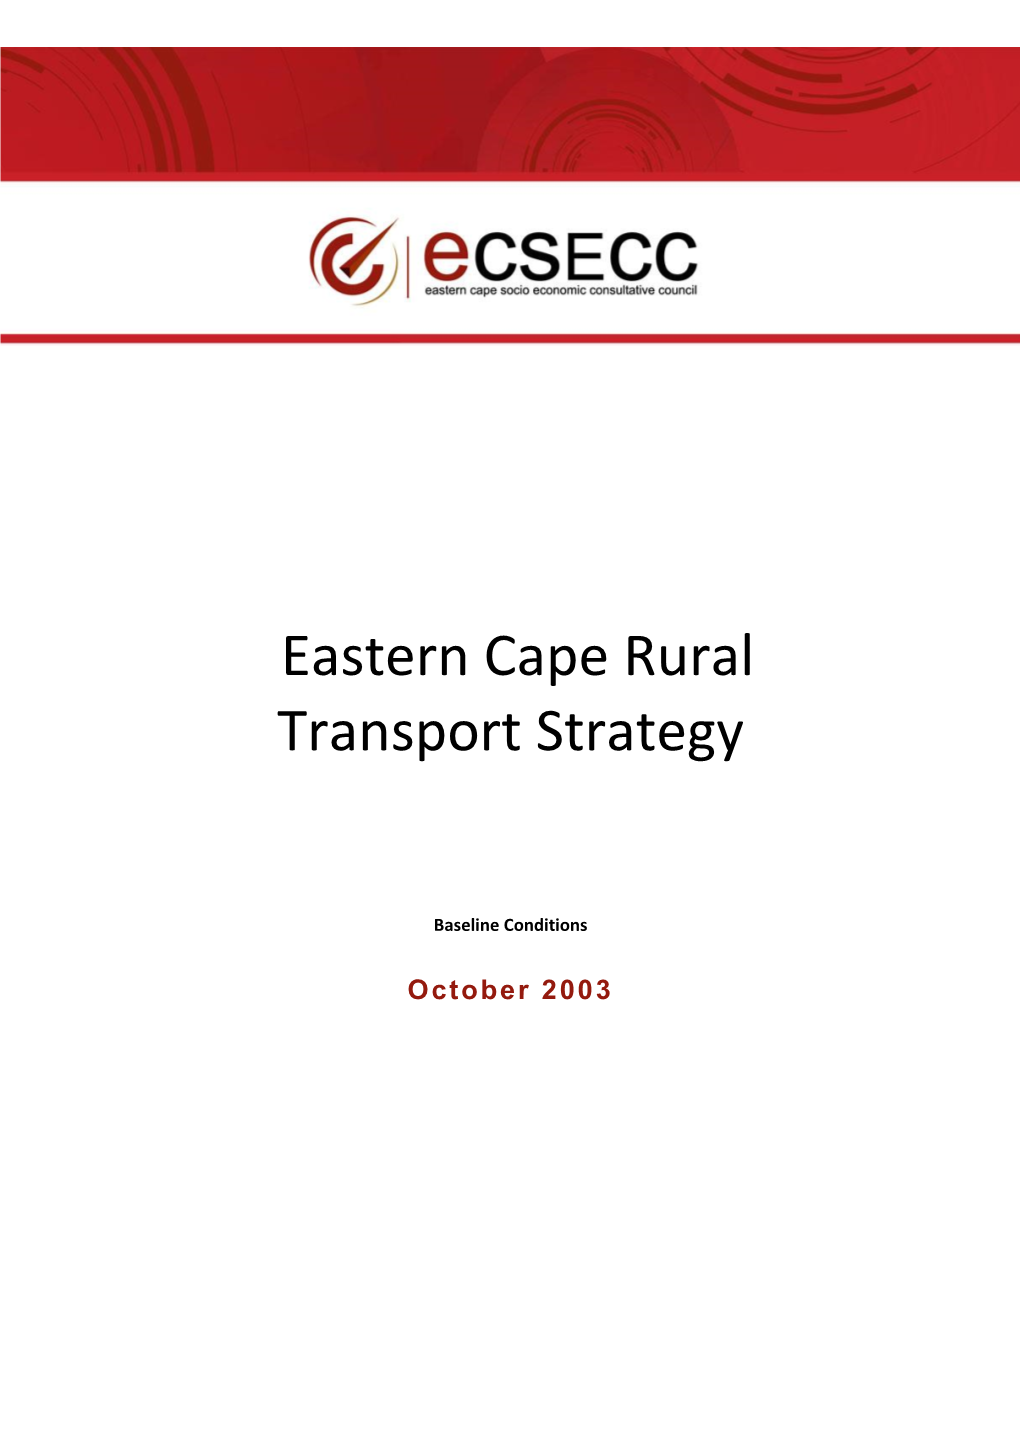 Eastern Cape Rural Transport Strategy